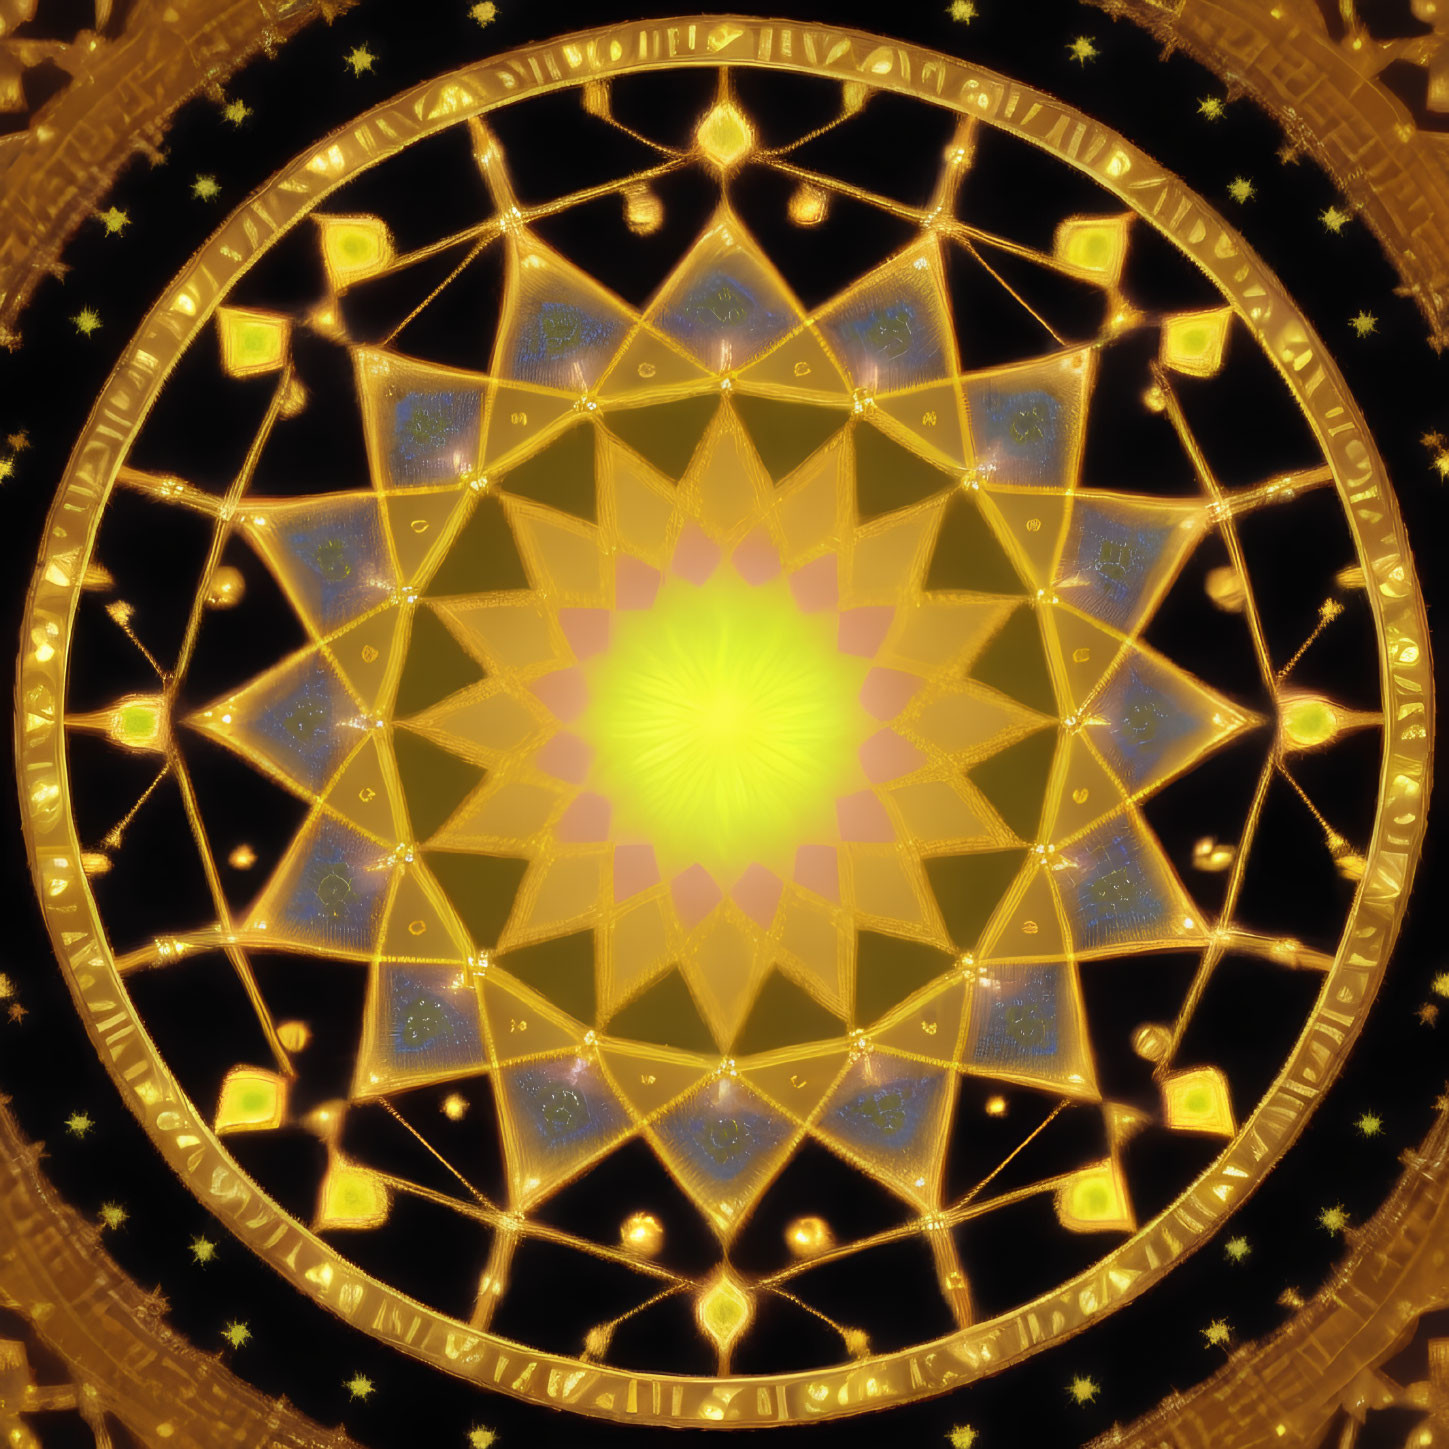 Intricate Gold and Yellow Fractal Kaleidoscope on Black Background